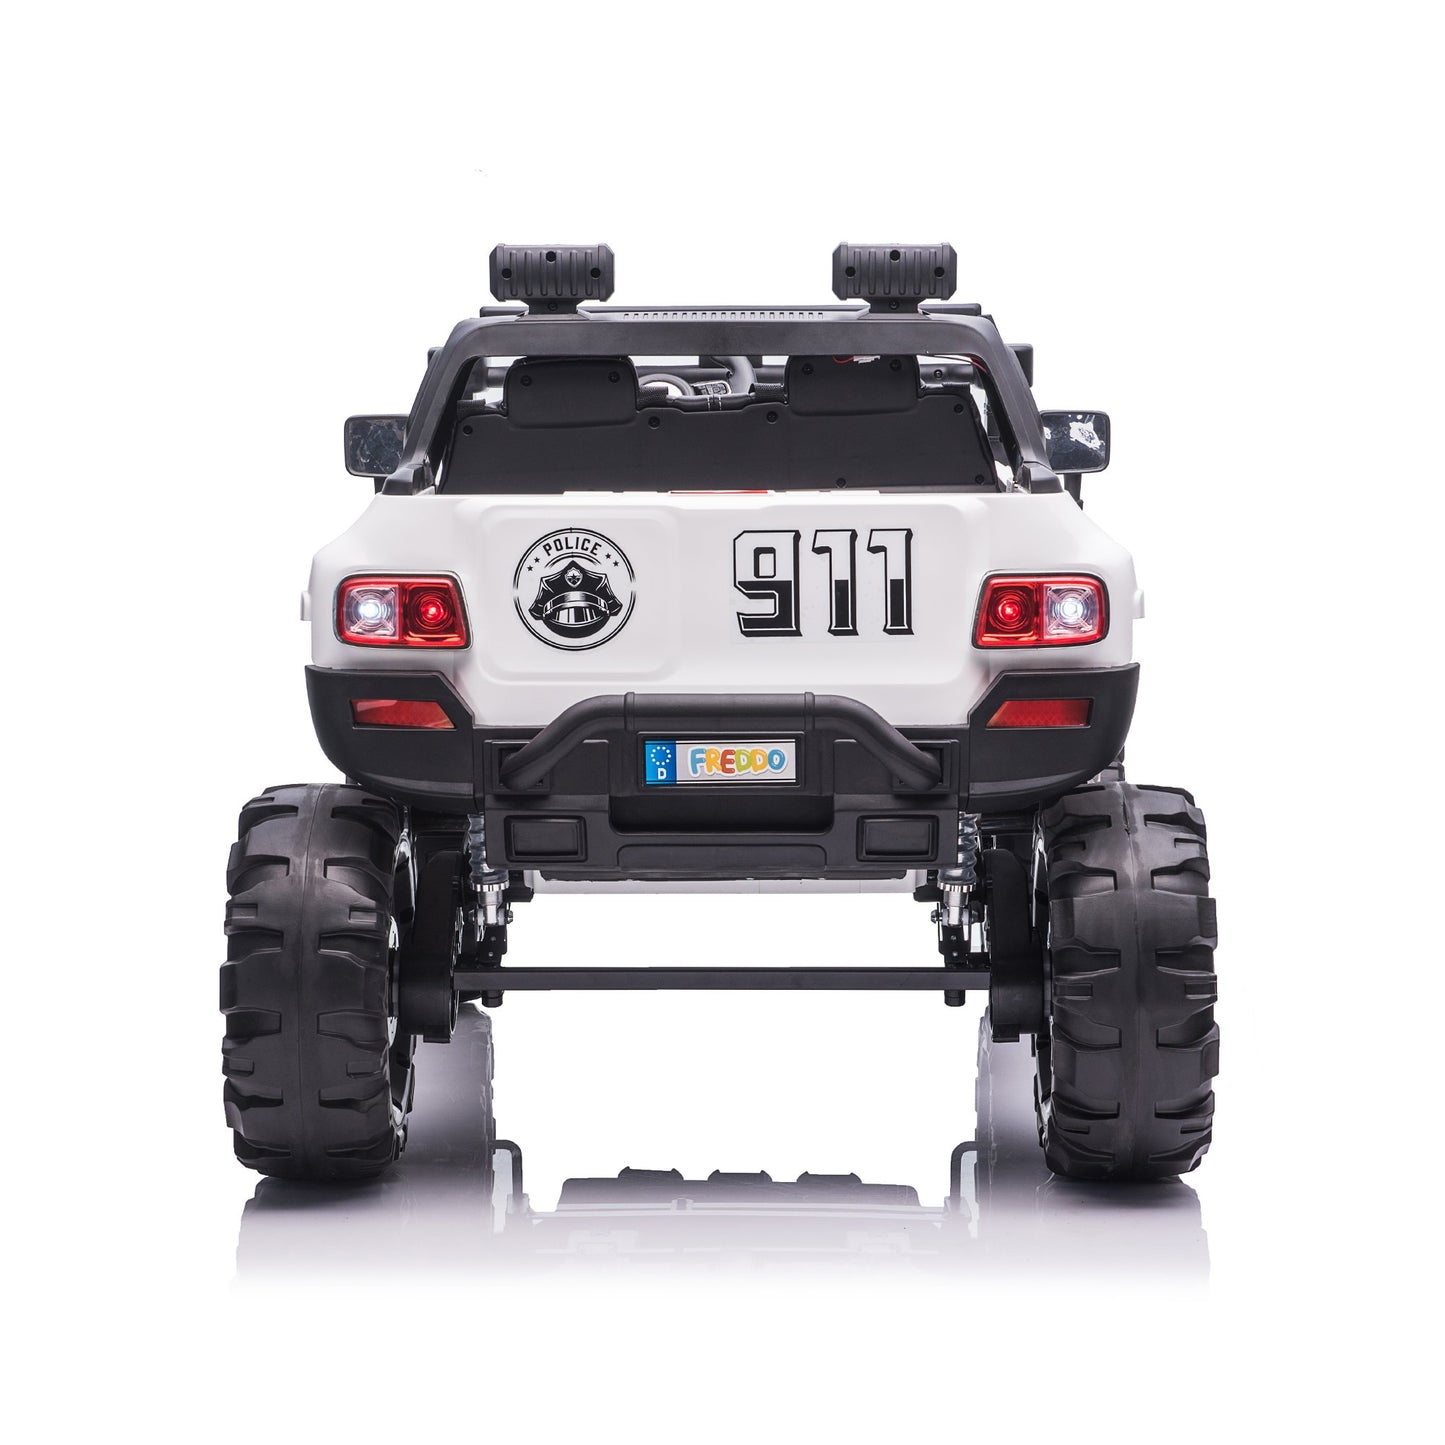 12V 4X4 Police Truck 2 Seater Ride on with Parental Remote Control for 3-8 Years (White)